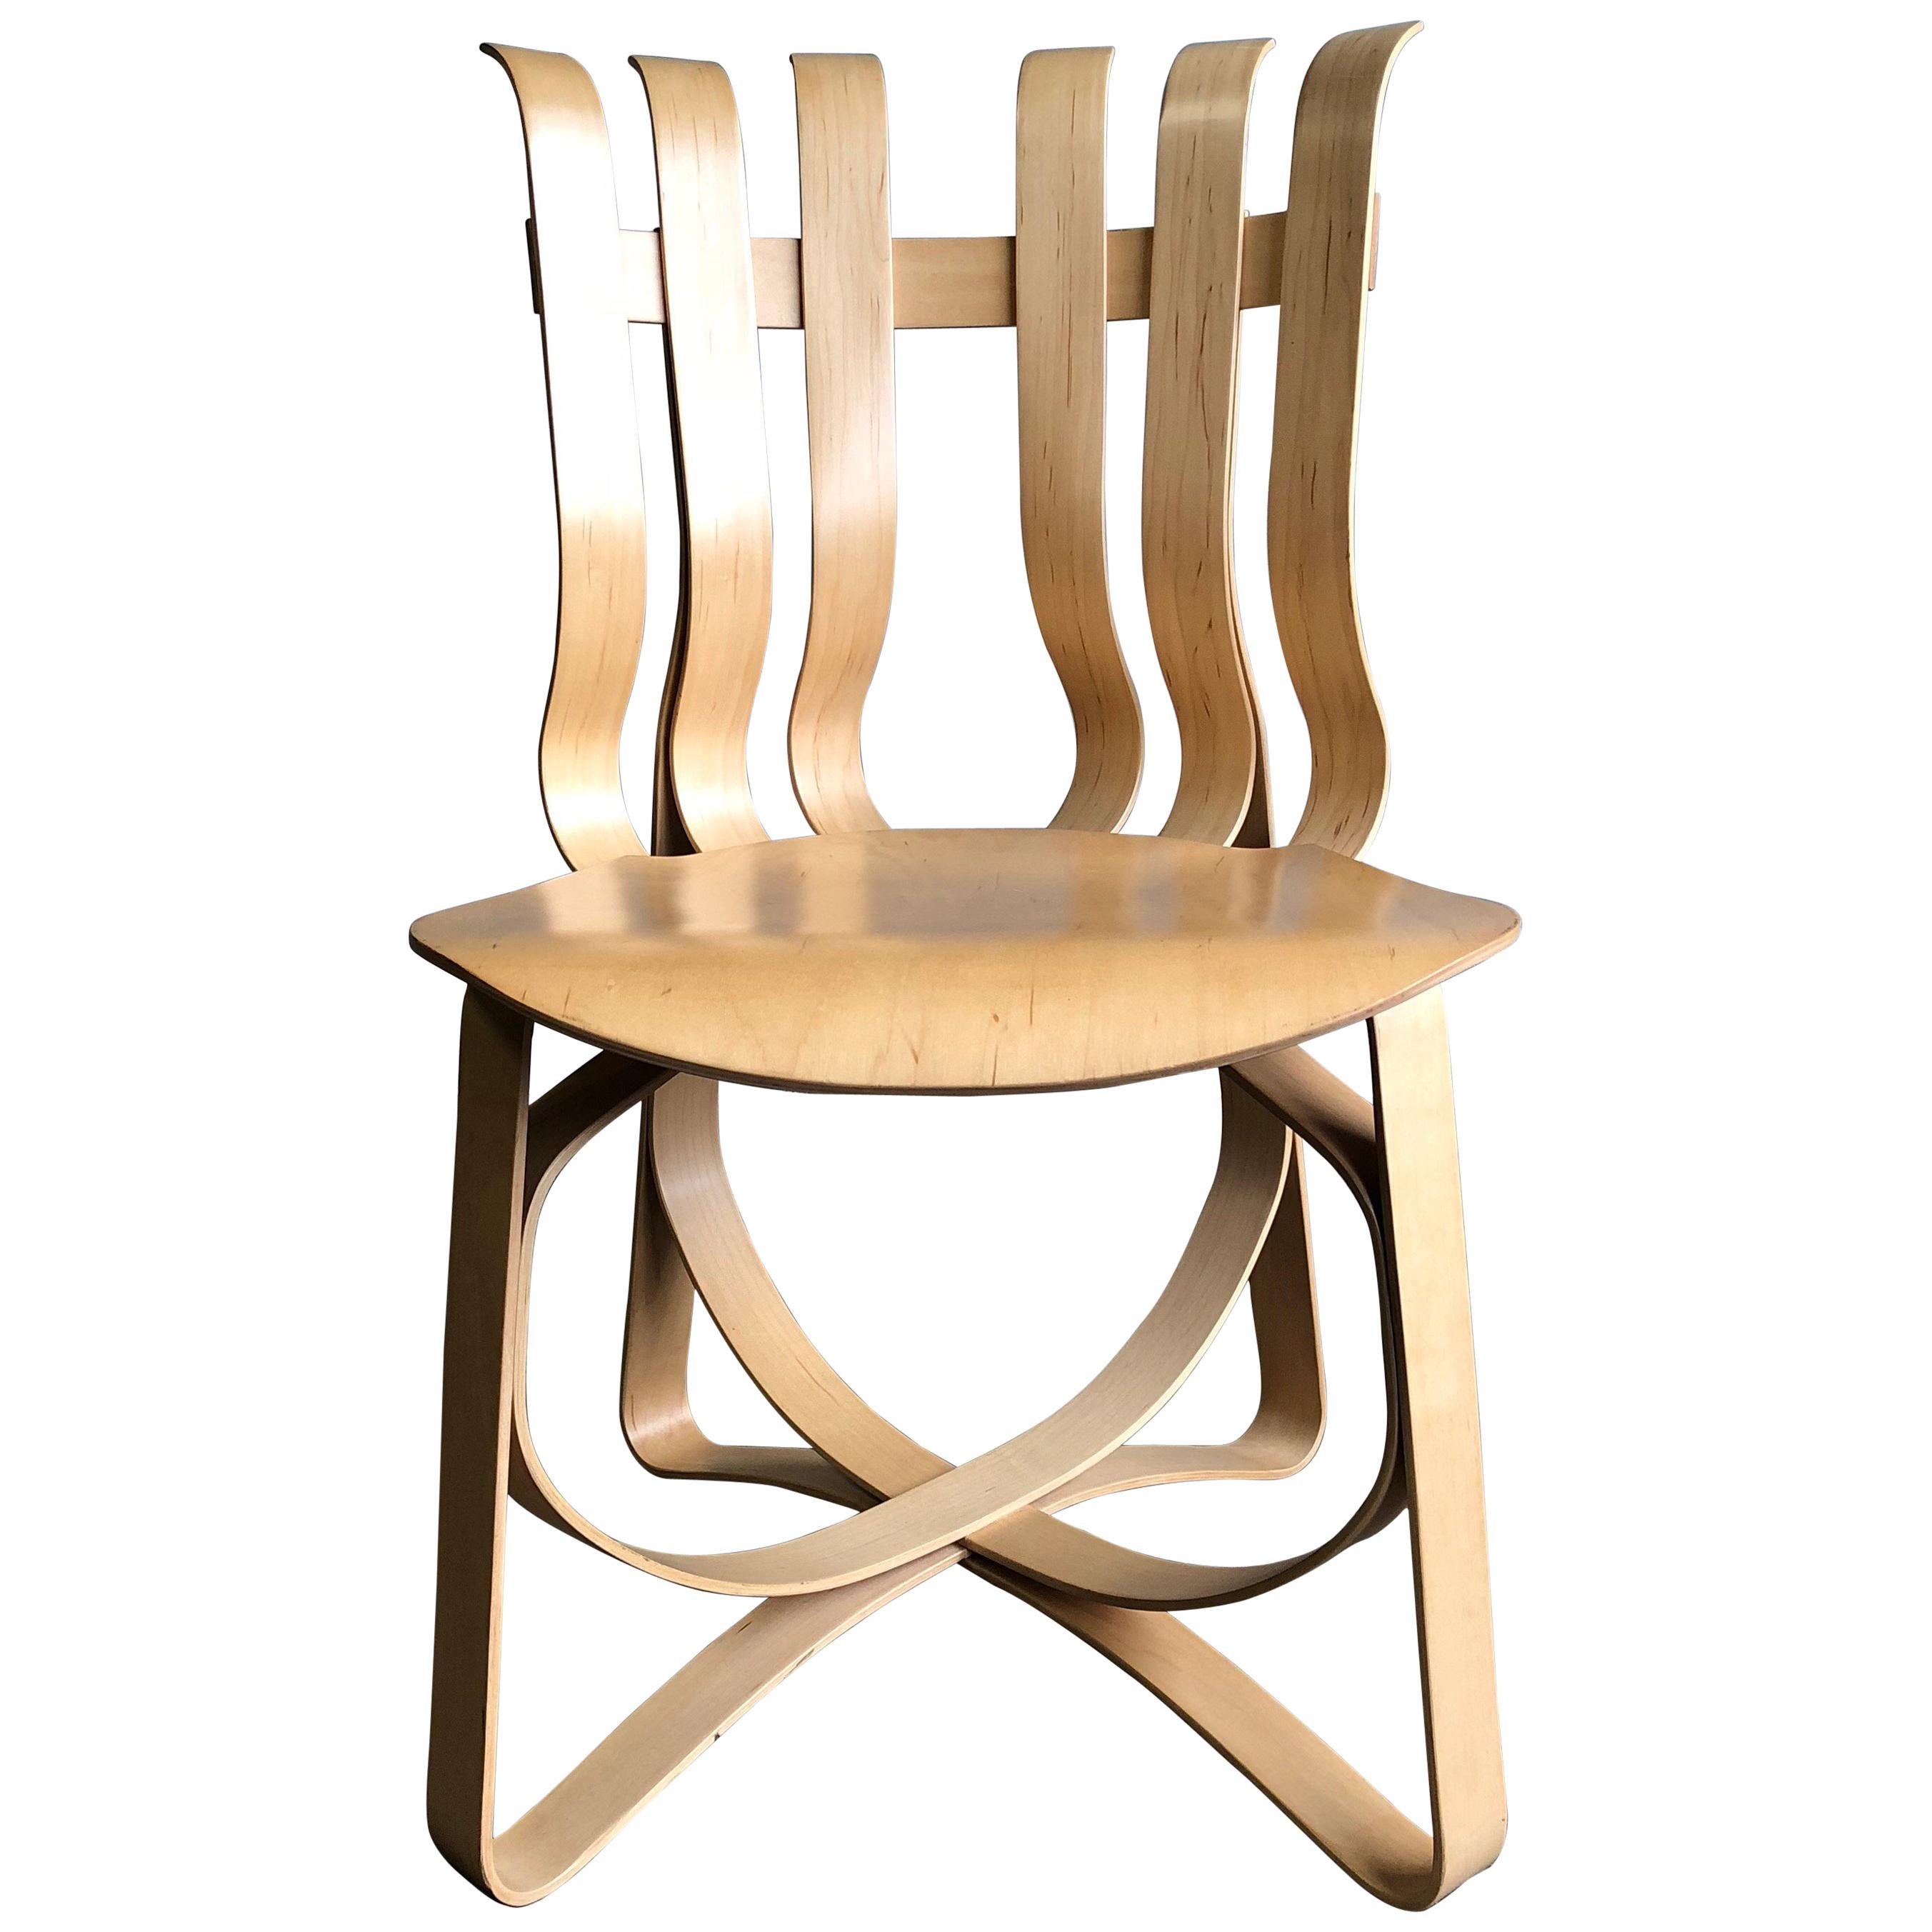 Frank Gehry Hat Trick Chair